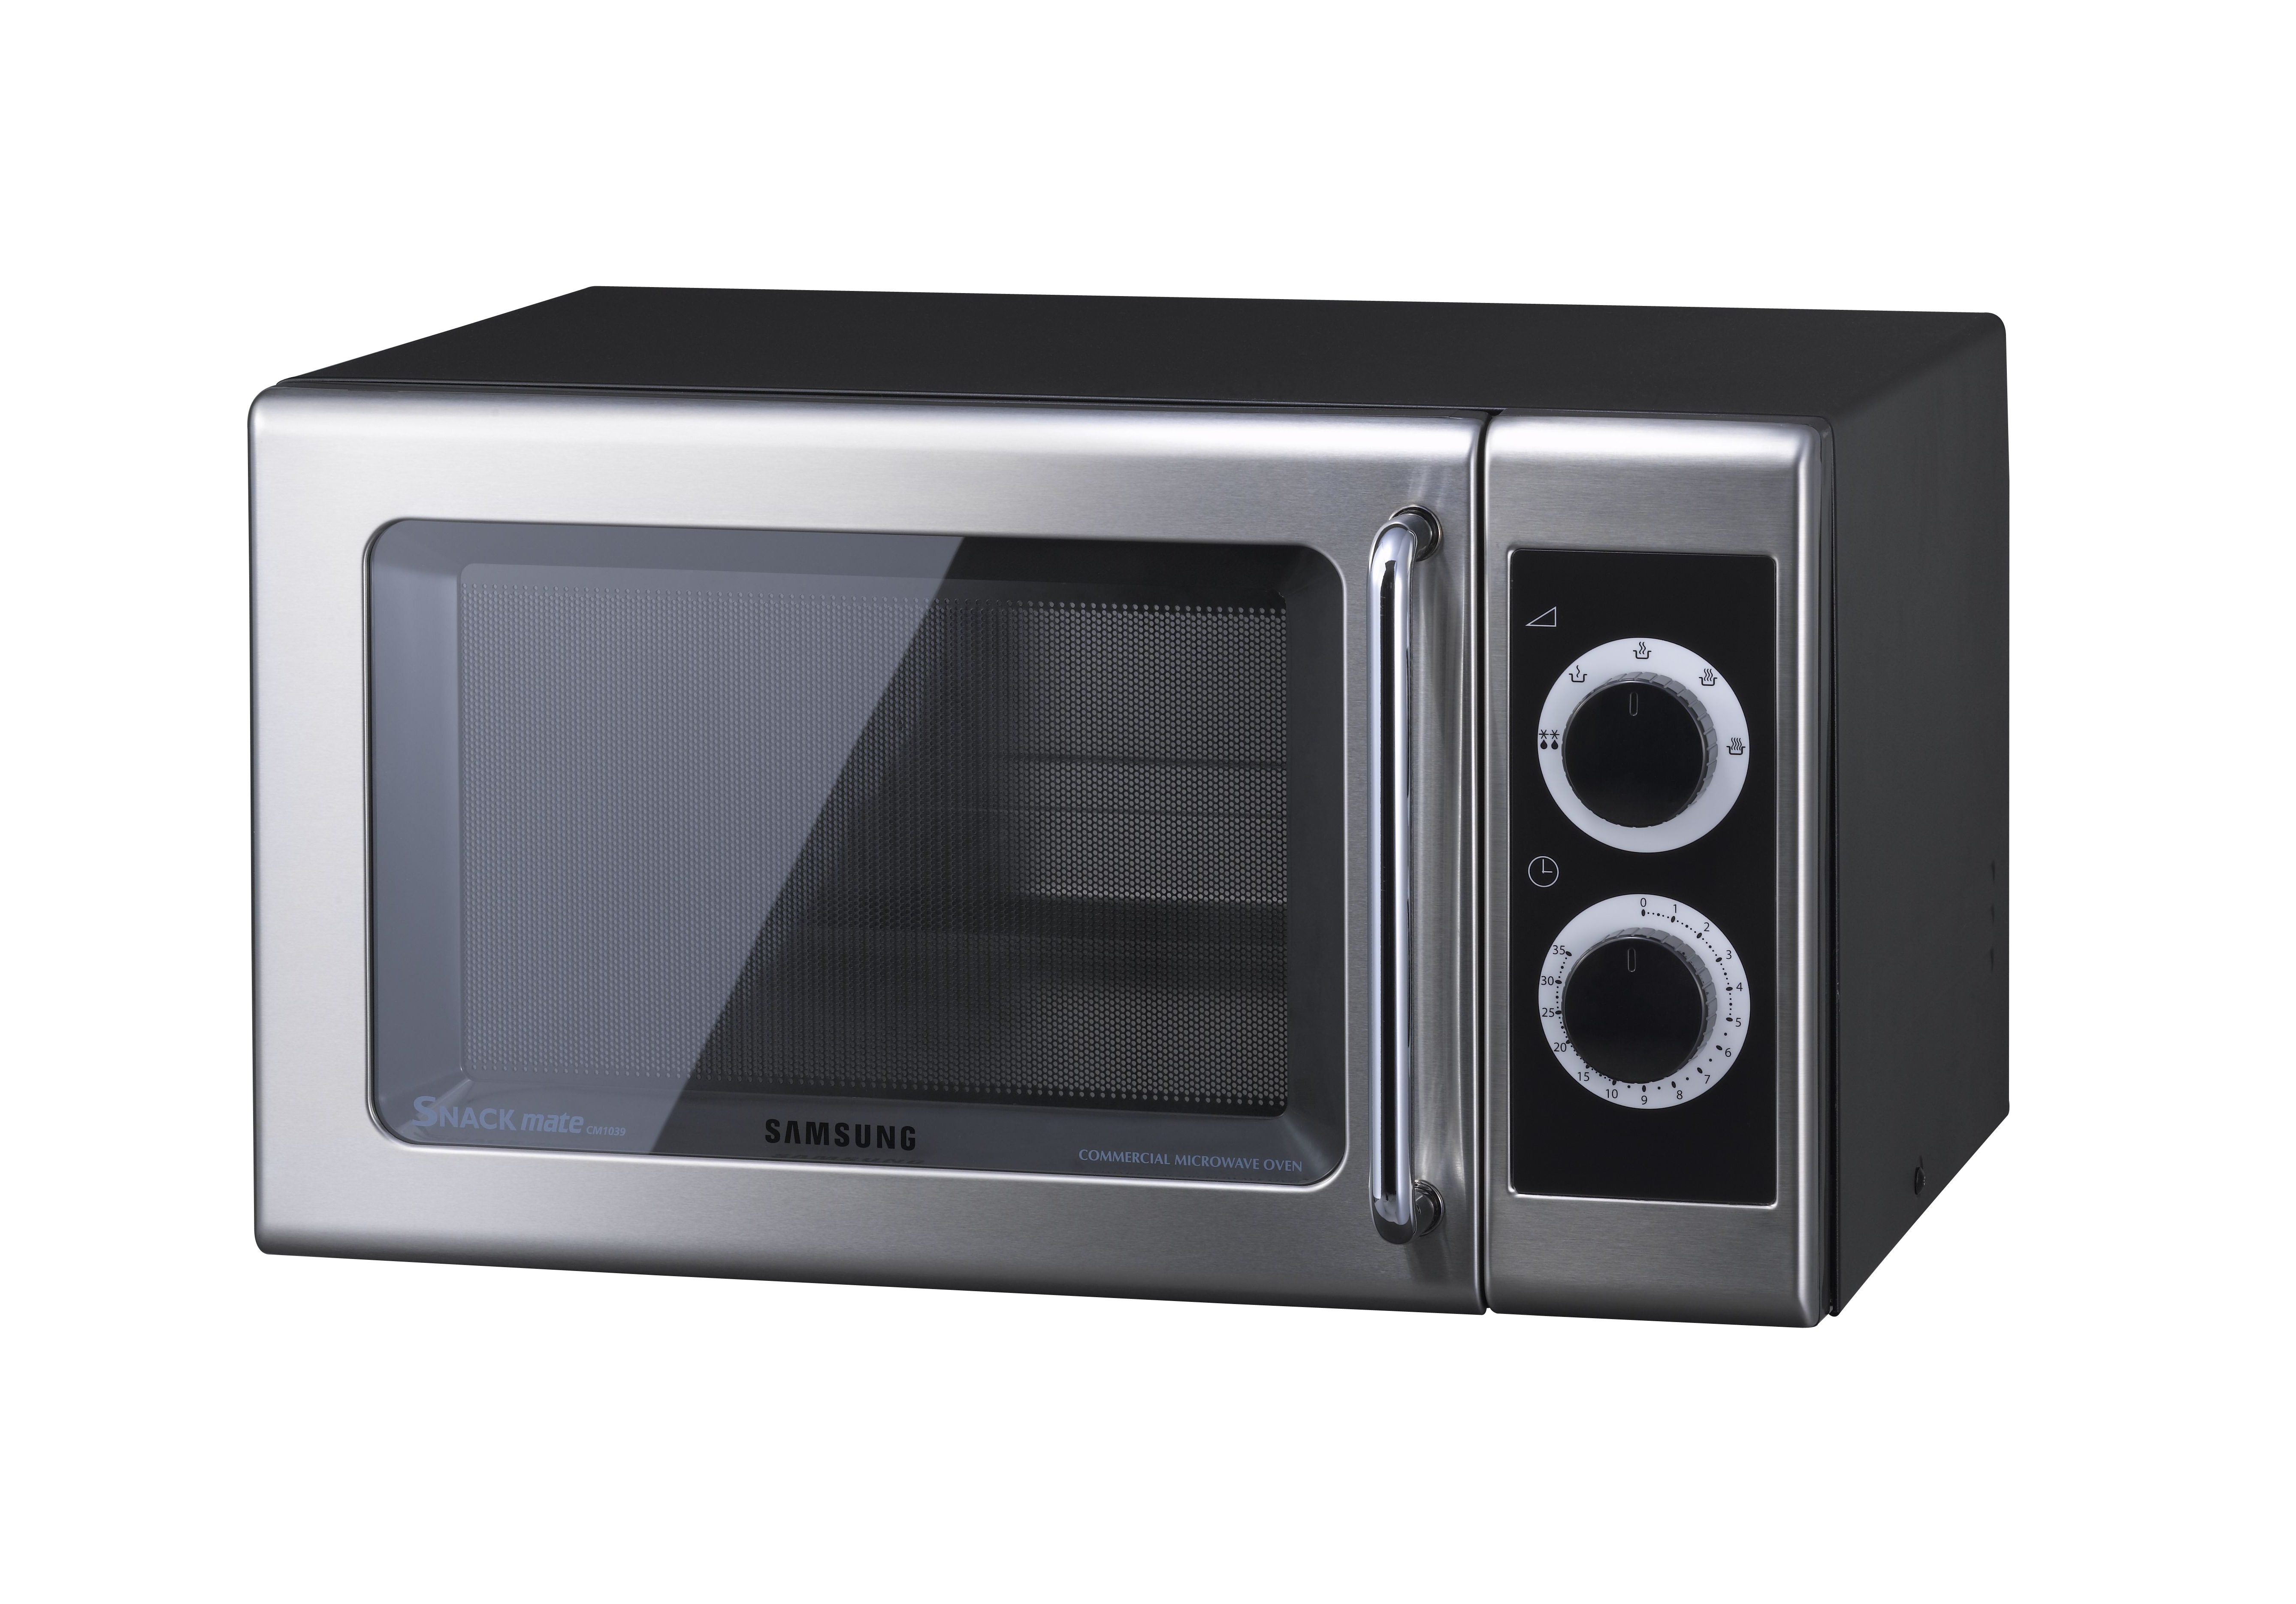 Apuro now supplies a Samsung semi-commercial 1000watt microwave oven - The Publicity Works5352 x 3738